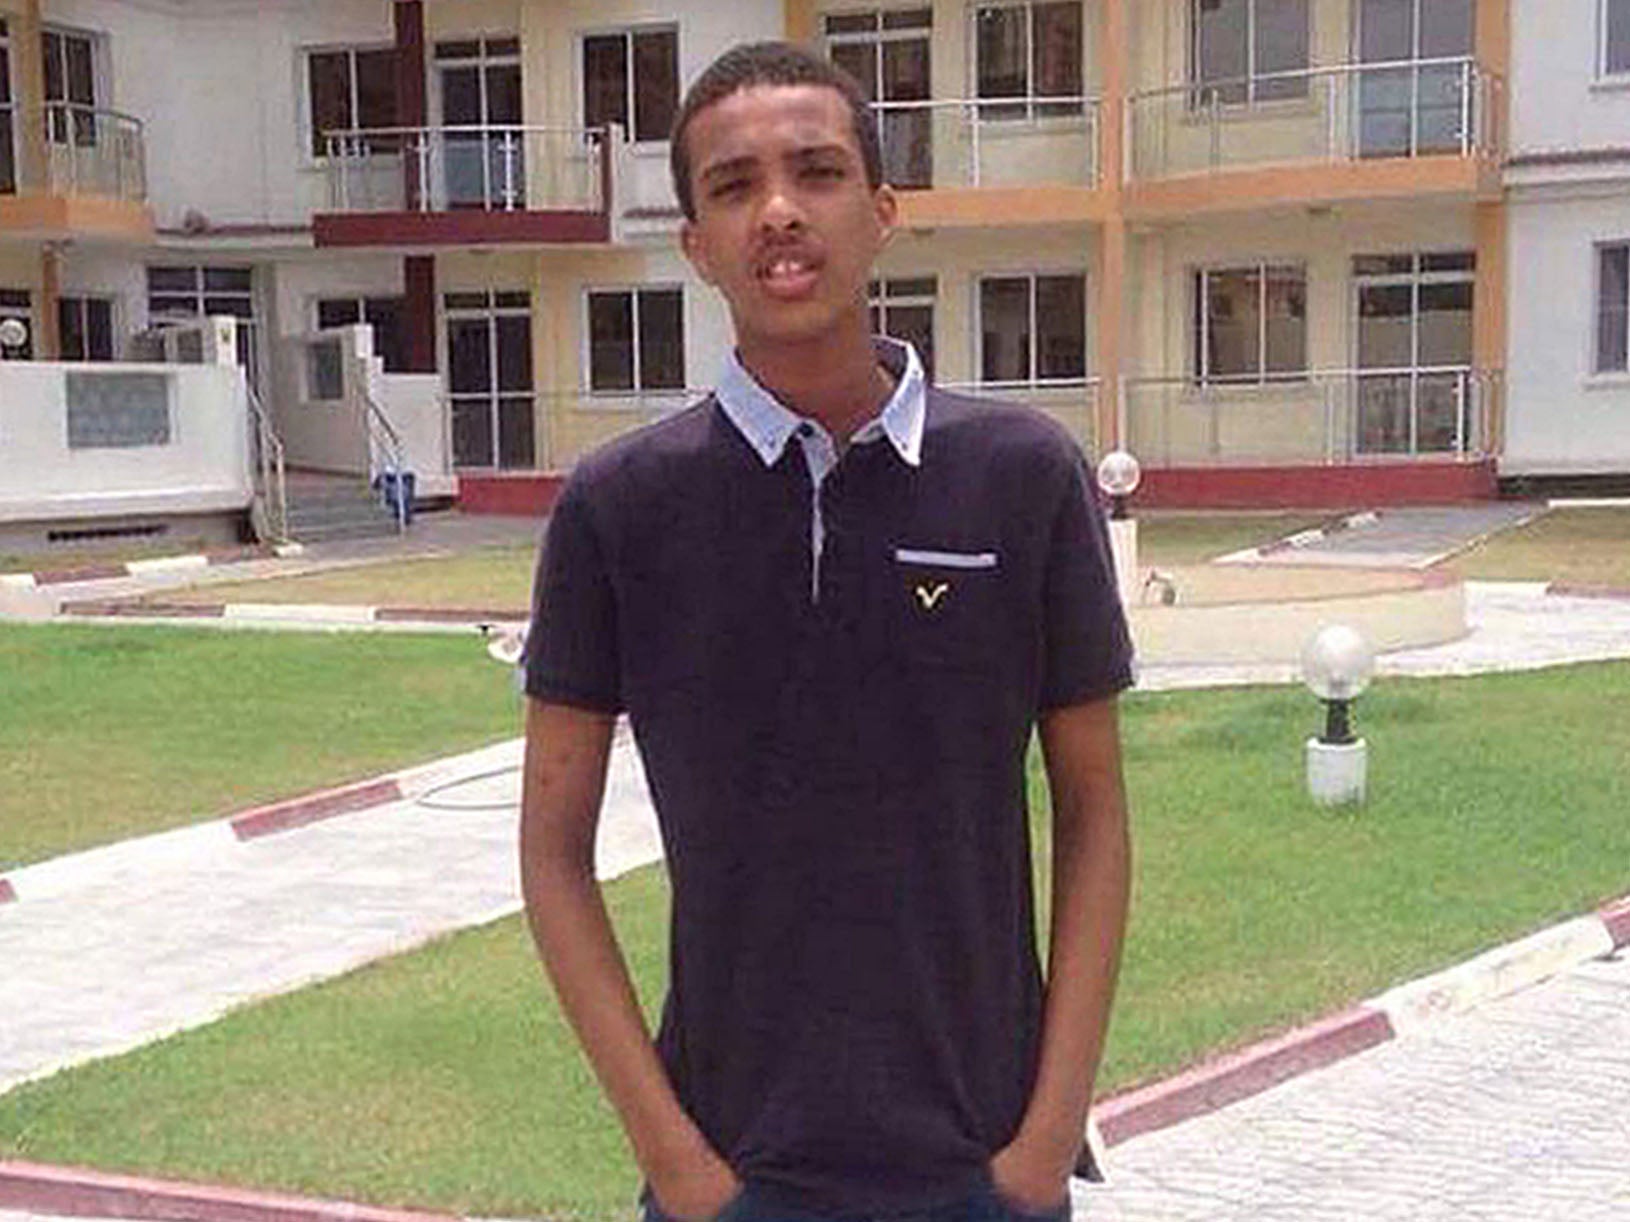 Abdikarim Hassan, 17, was one of two victims stabbed to death within hours